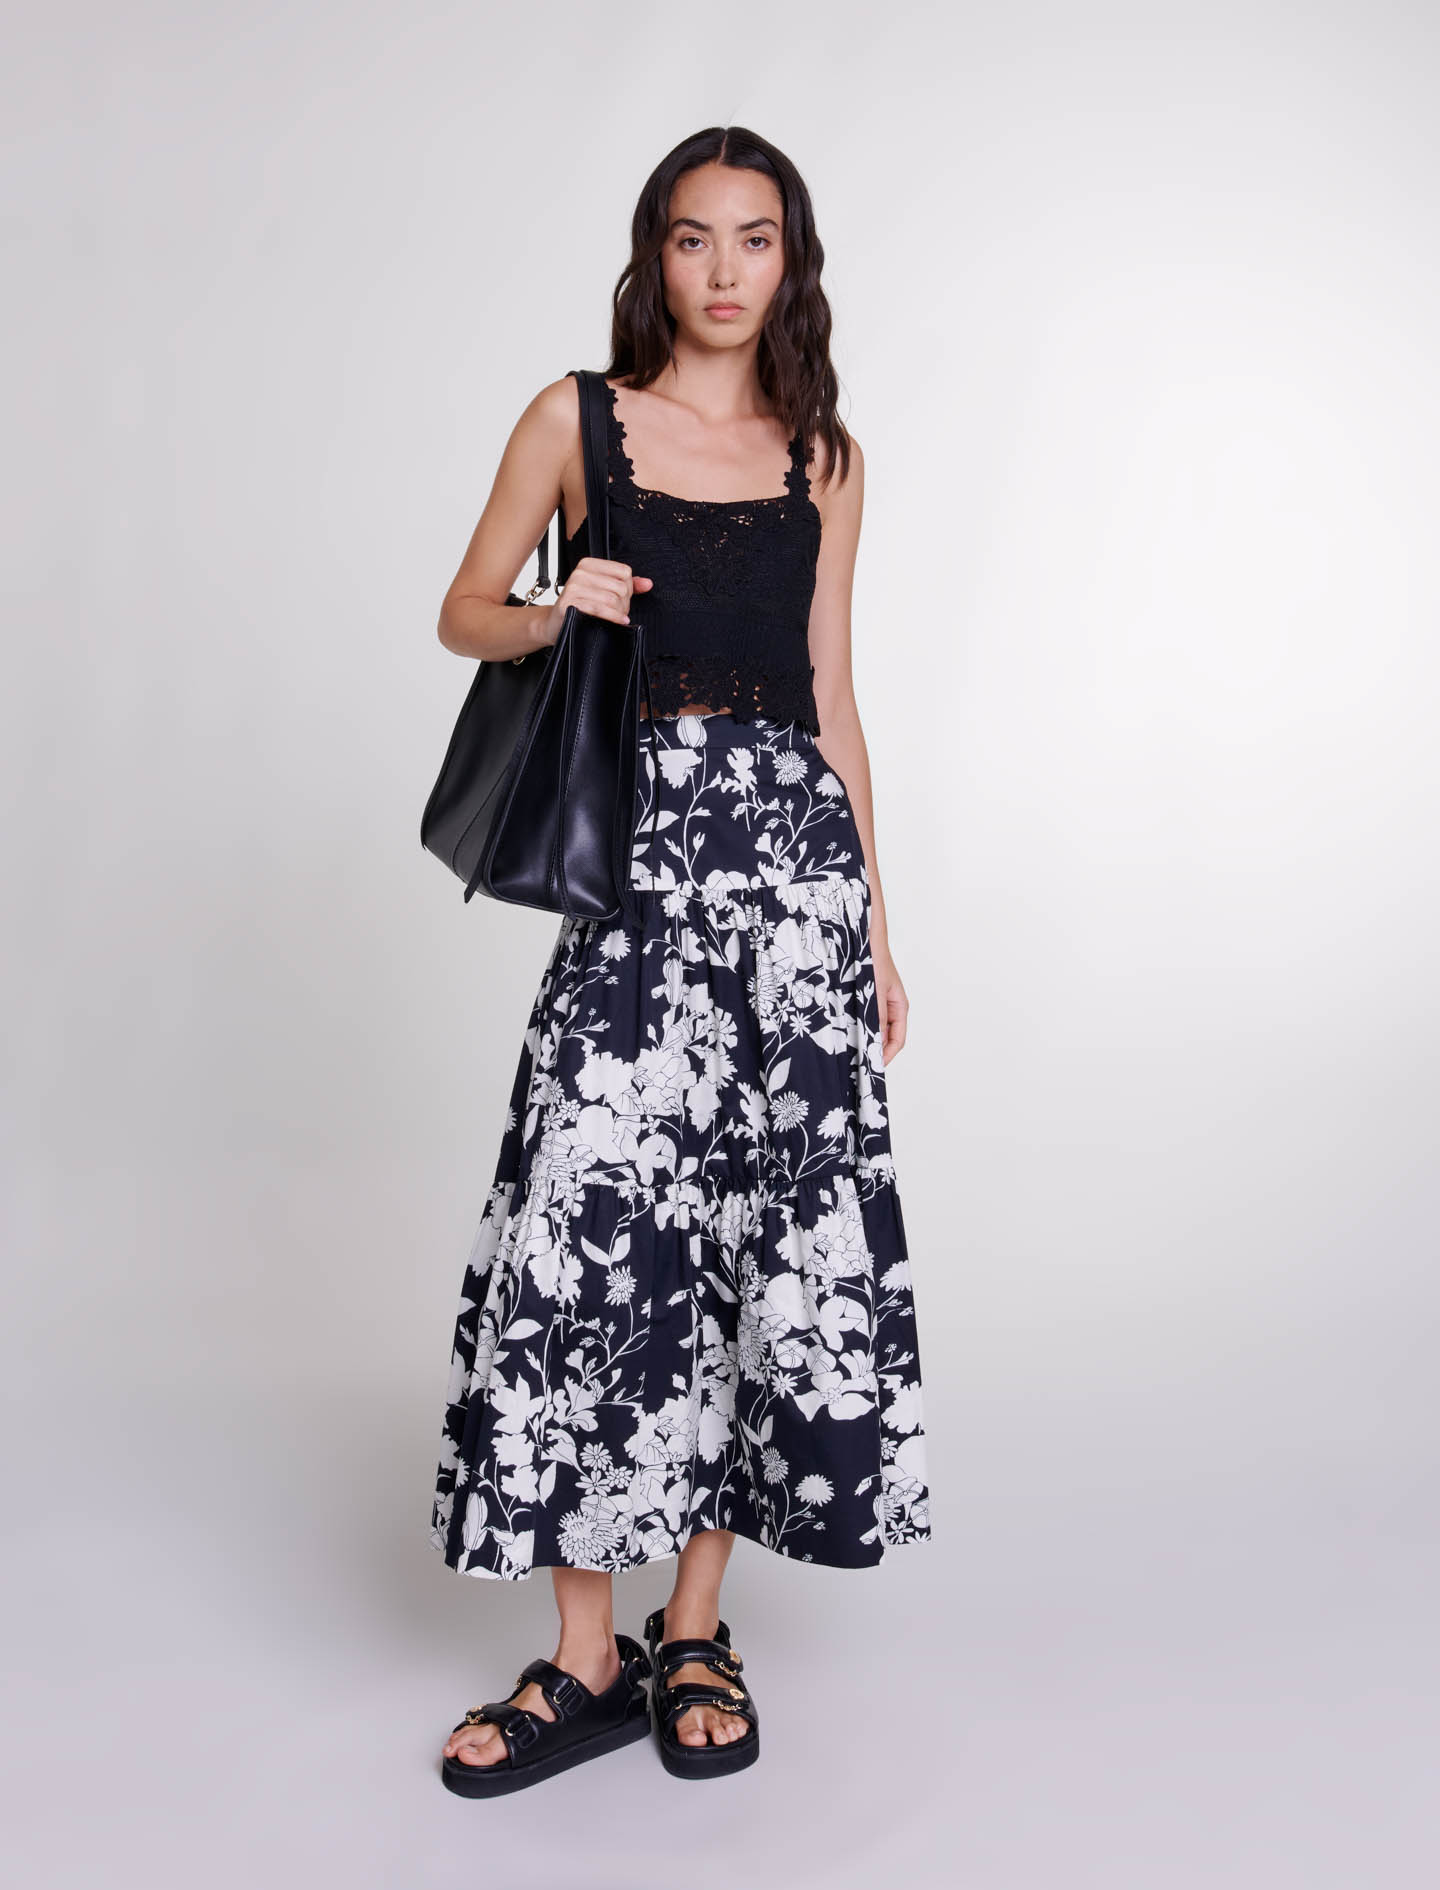 Maje Woman's cotton Floral print maxi skirt for Spring/Summer, in color Floral ecru black print /